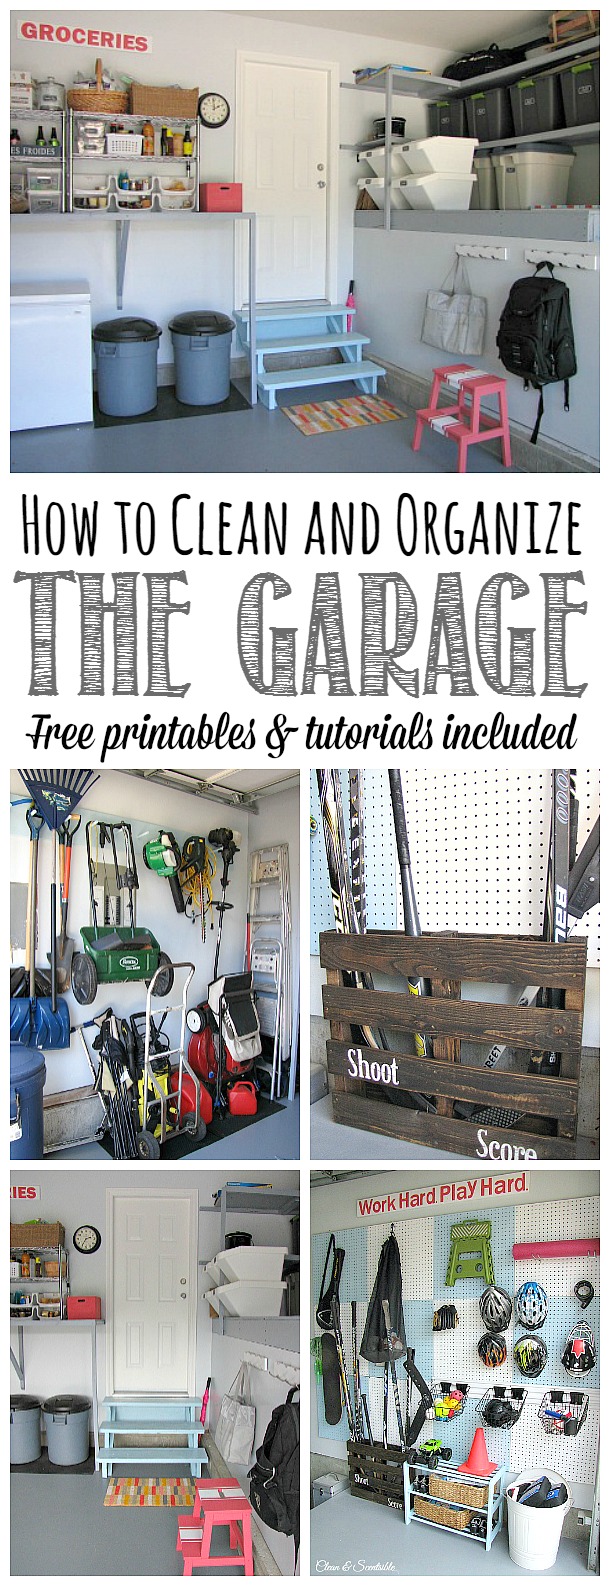 Organize, deep clean, and declutter one room in your house per month. By the end of the year you will have an organized home and an established plan to keep it that way! A monthly to do list and free printables are included.